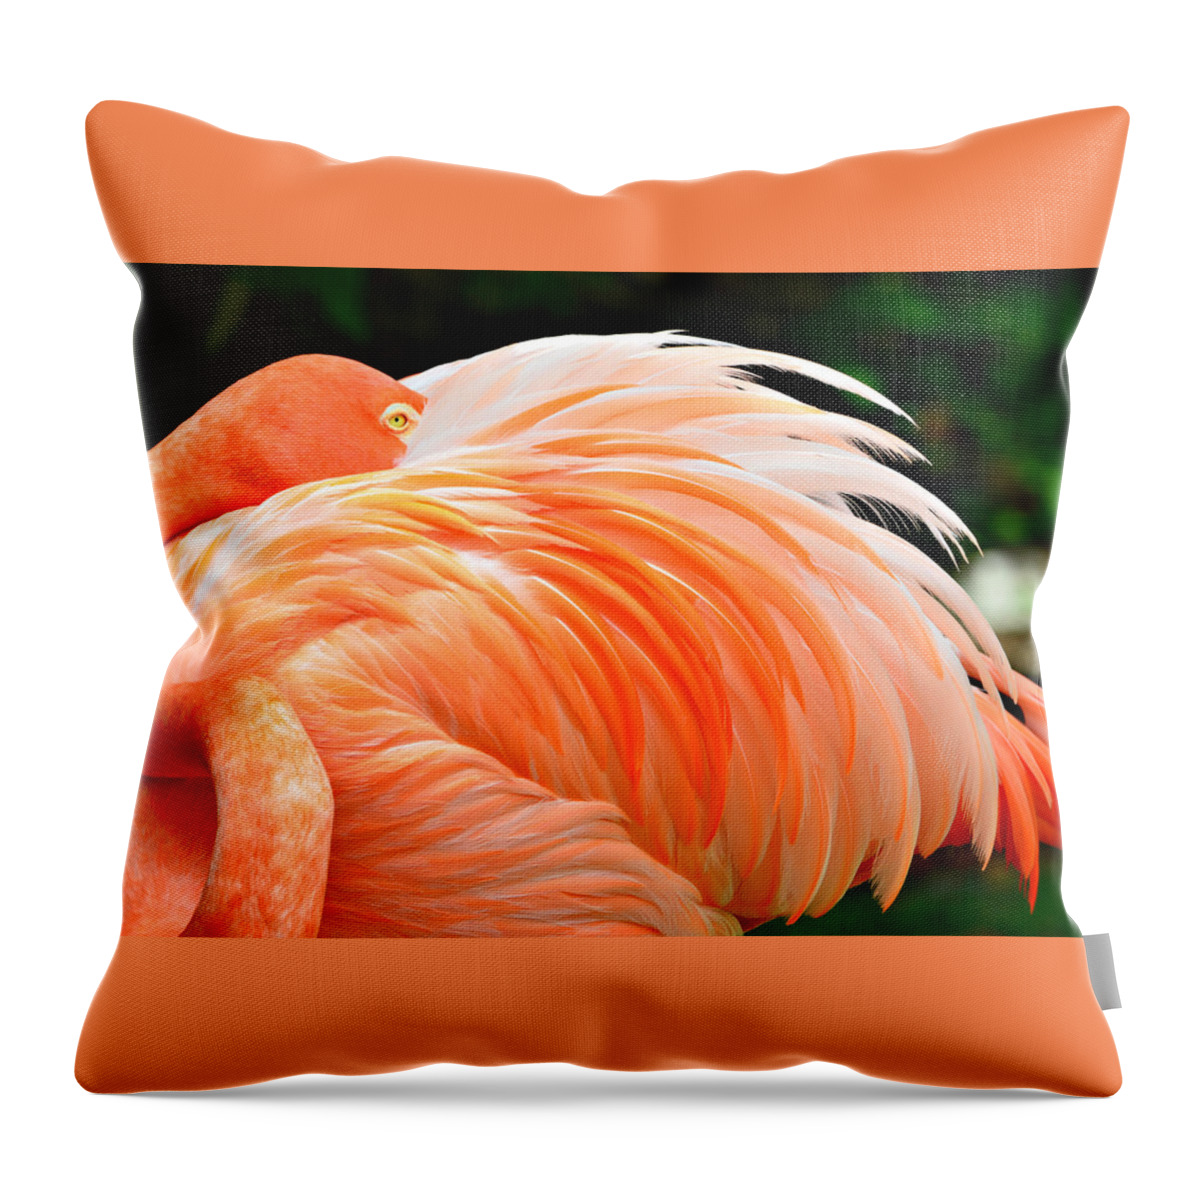 Flamingo Throw Pillow featuring the photograph The Flamingo by Ally White